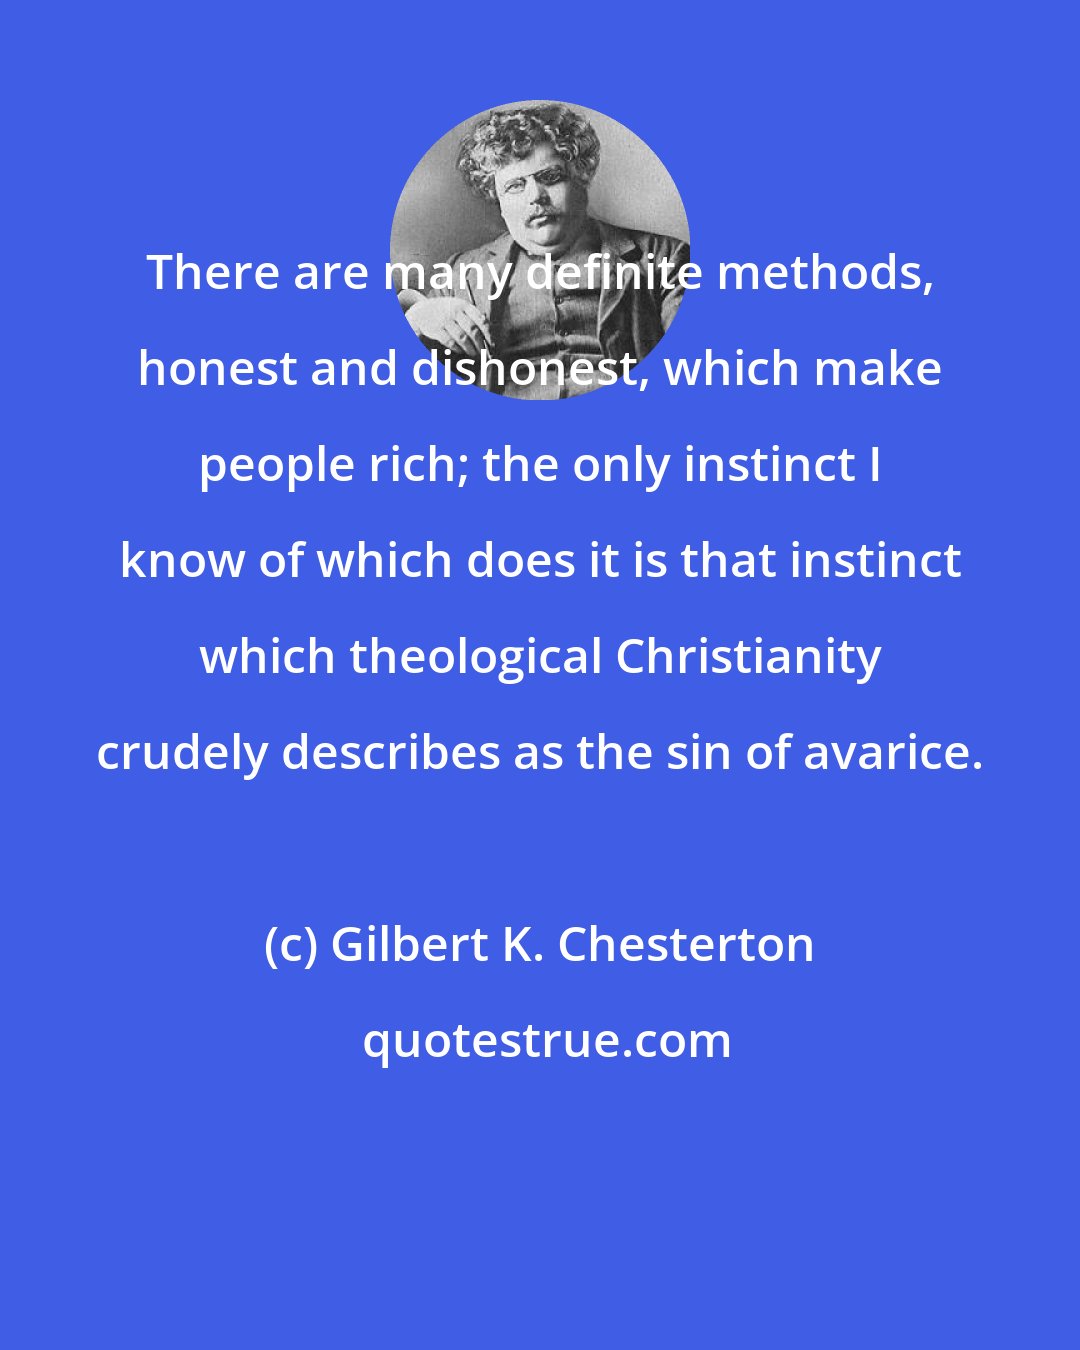 Gilbert K. Chesterton: There are many definite methods, honest and dishonest, which make people rich; the only instinct I know of which does it is that instinct which theological Christianity crudely describes as the sin of avarice.